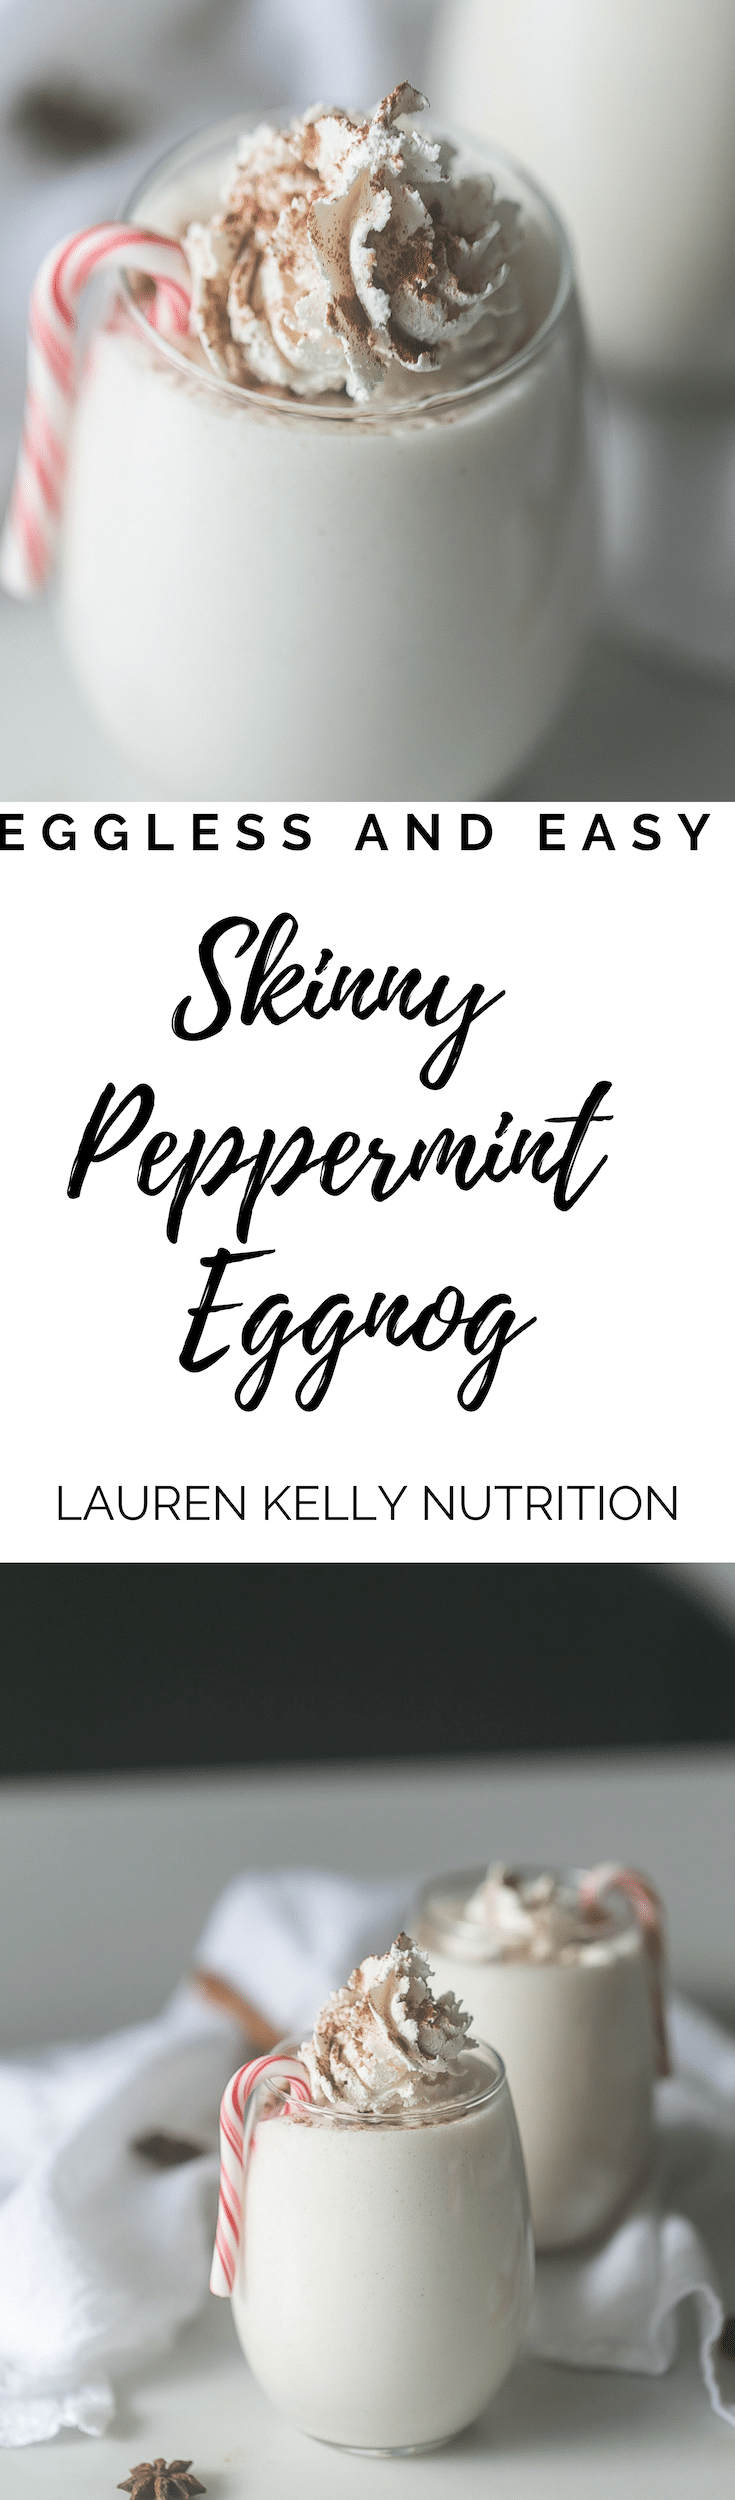 This Skinny Peppermint Eggnog is rich and creamy! It contains all simple ingredients, low carb and no eggs! From Lauren Kelly Nutrition 